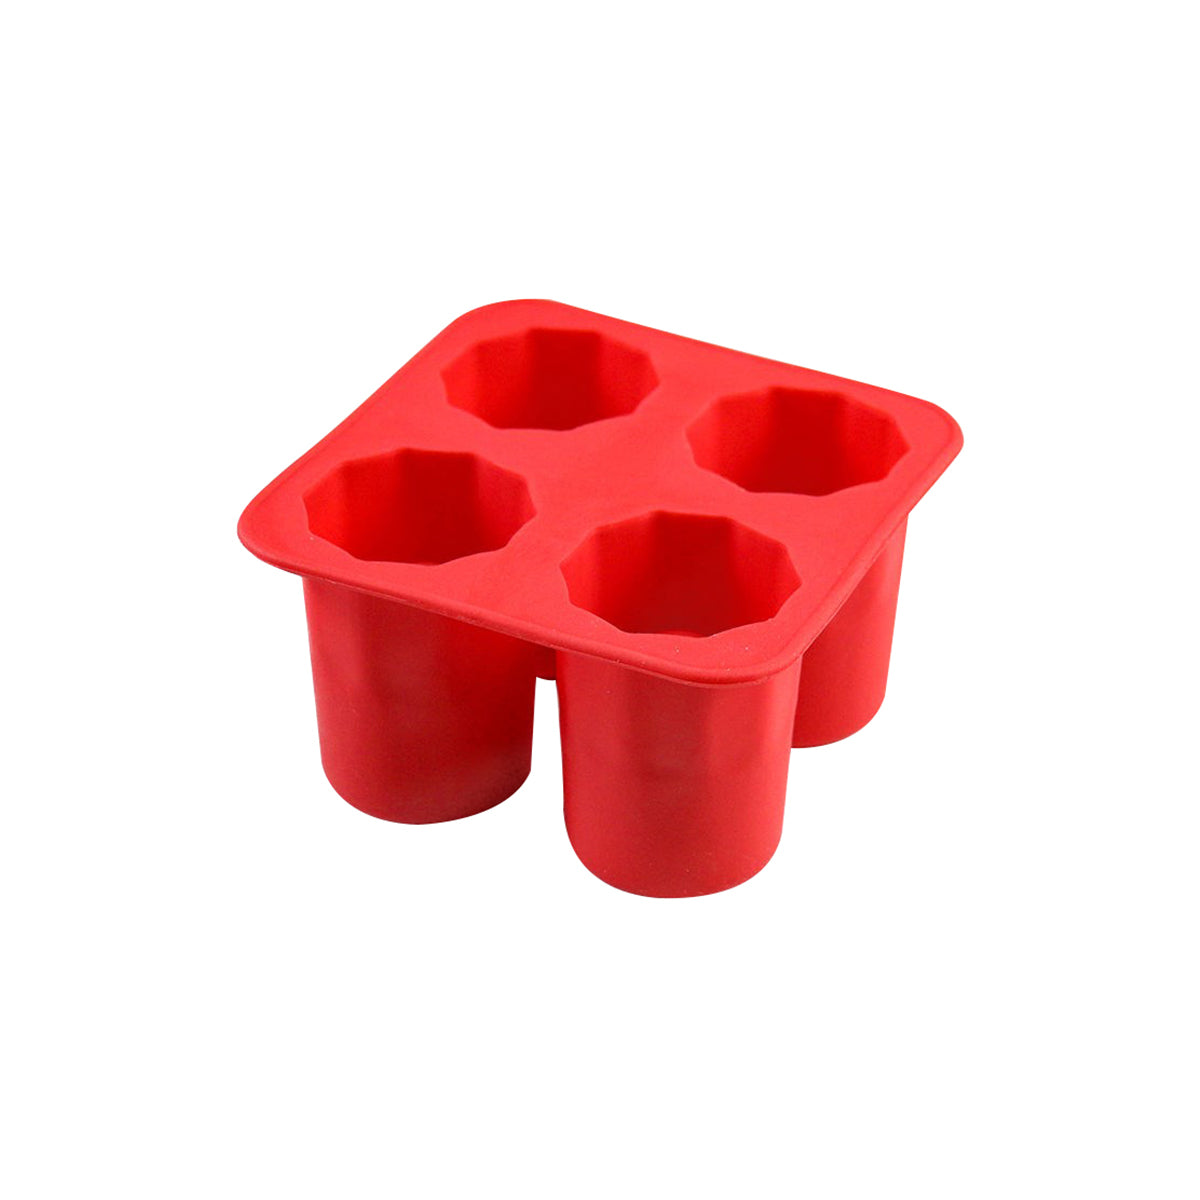 RCSL1RD1-8 Redds Redds Silicone Shot Cup 4x30ml Tomkin Australia Hospitality Supplies